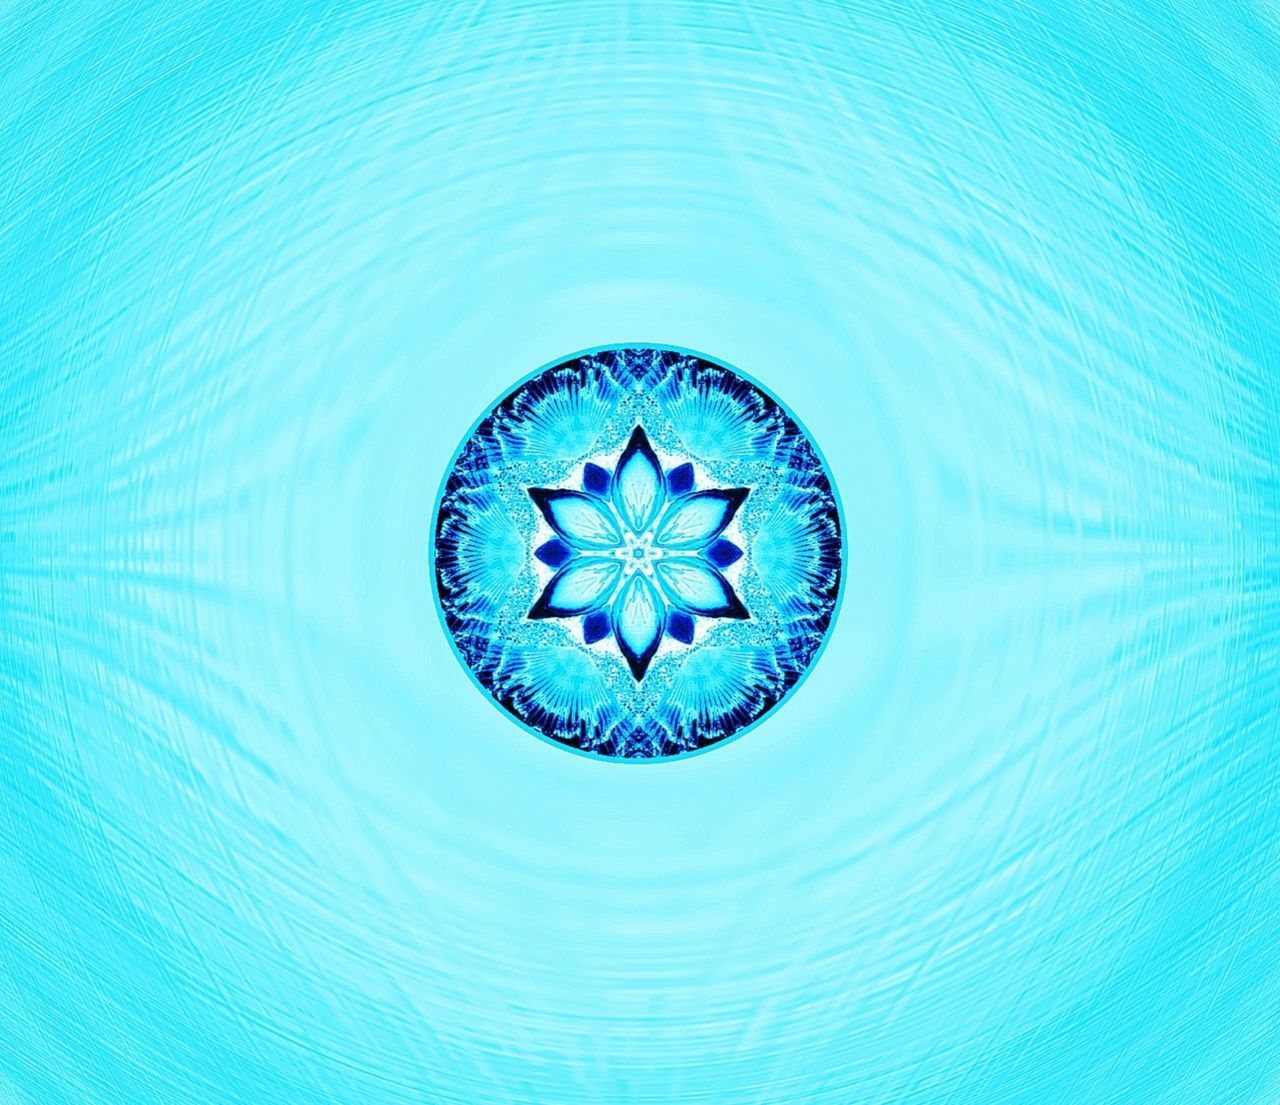 blue, water, no people, close-up, nature, studio shot, shape, shiny, indoors, full frame, reflection, geometric shape, backgrounds, colored background, copy space, motion, blurred motion, circle, rippled, blue background, concentric, turquoise colored, luxury